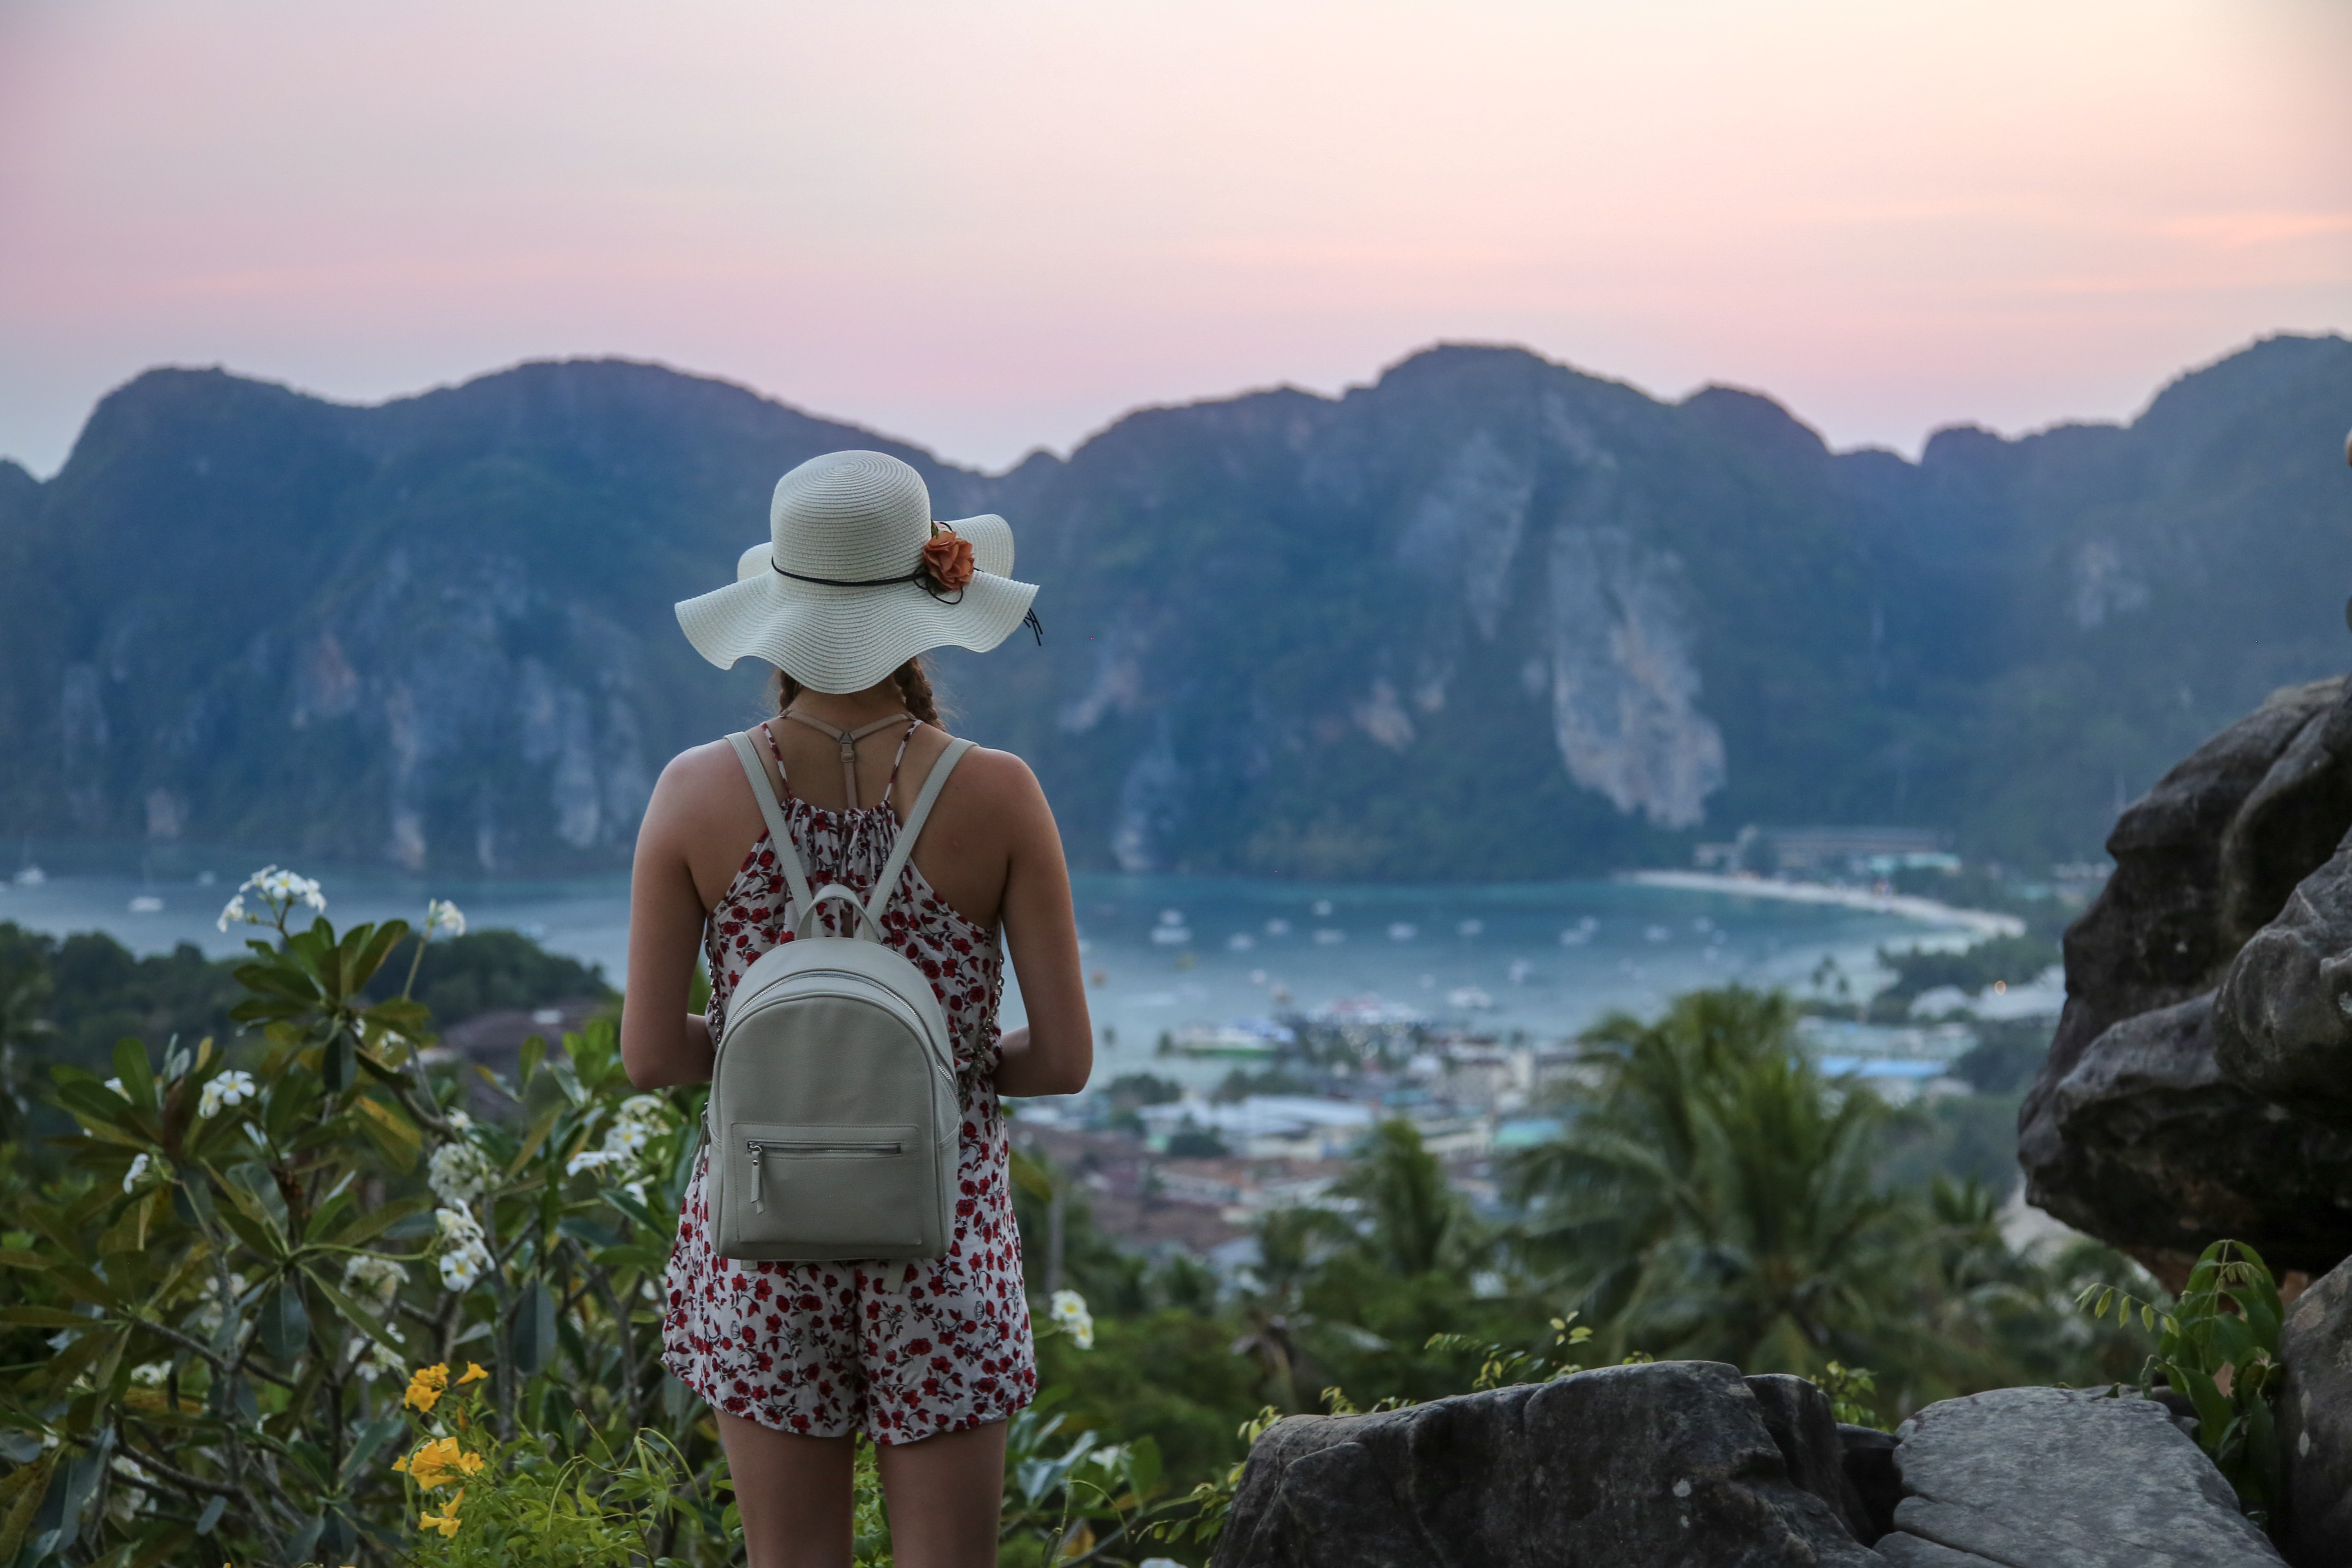 Sunset in Phi Phi viewpoint, Thailand